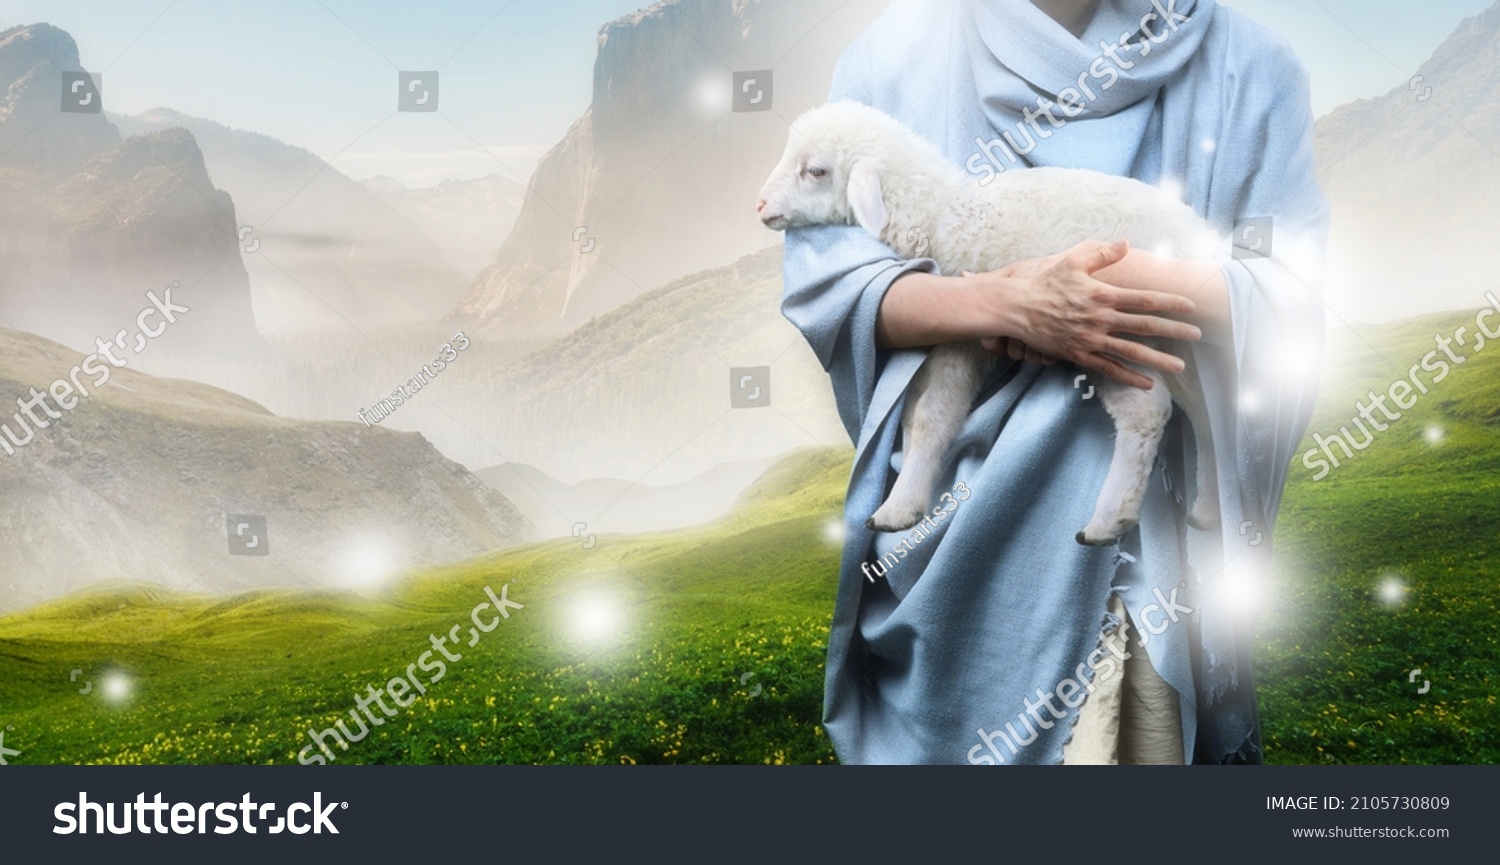 Jesus recovered the lost sheep carrying it in his arms. Biblical story conceptual theme. #2105730809